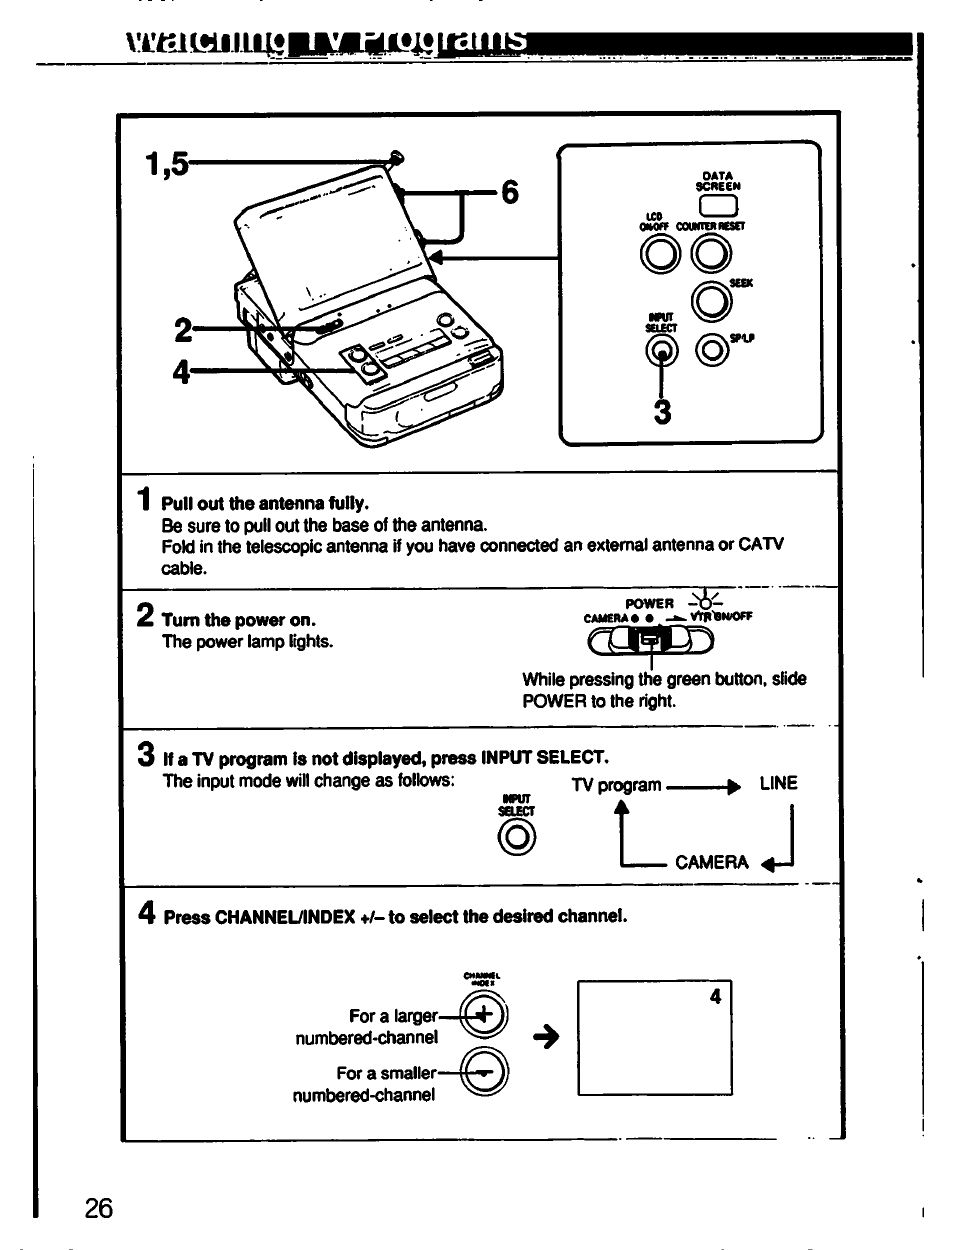 Sony GV-500 User Manual | Page 26 / 84